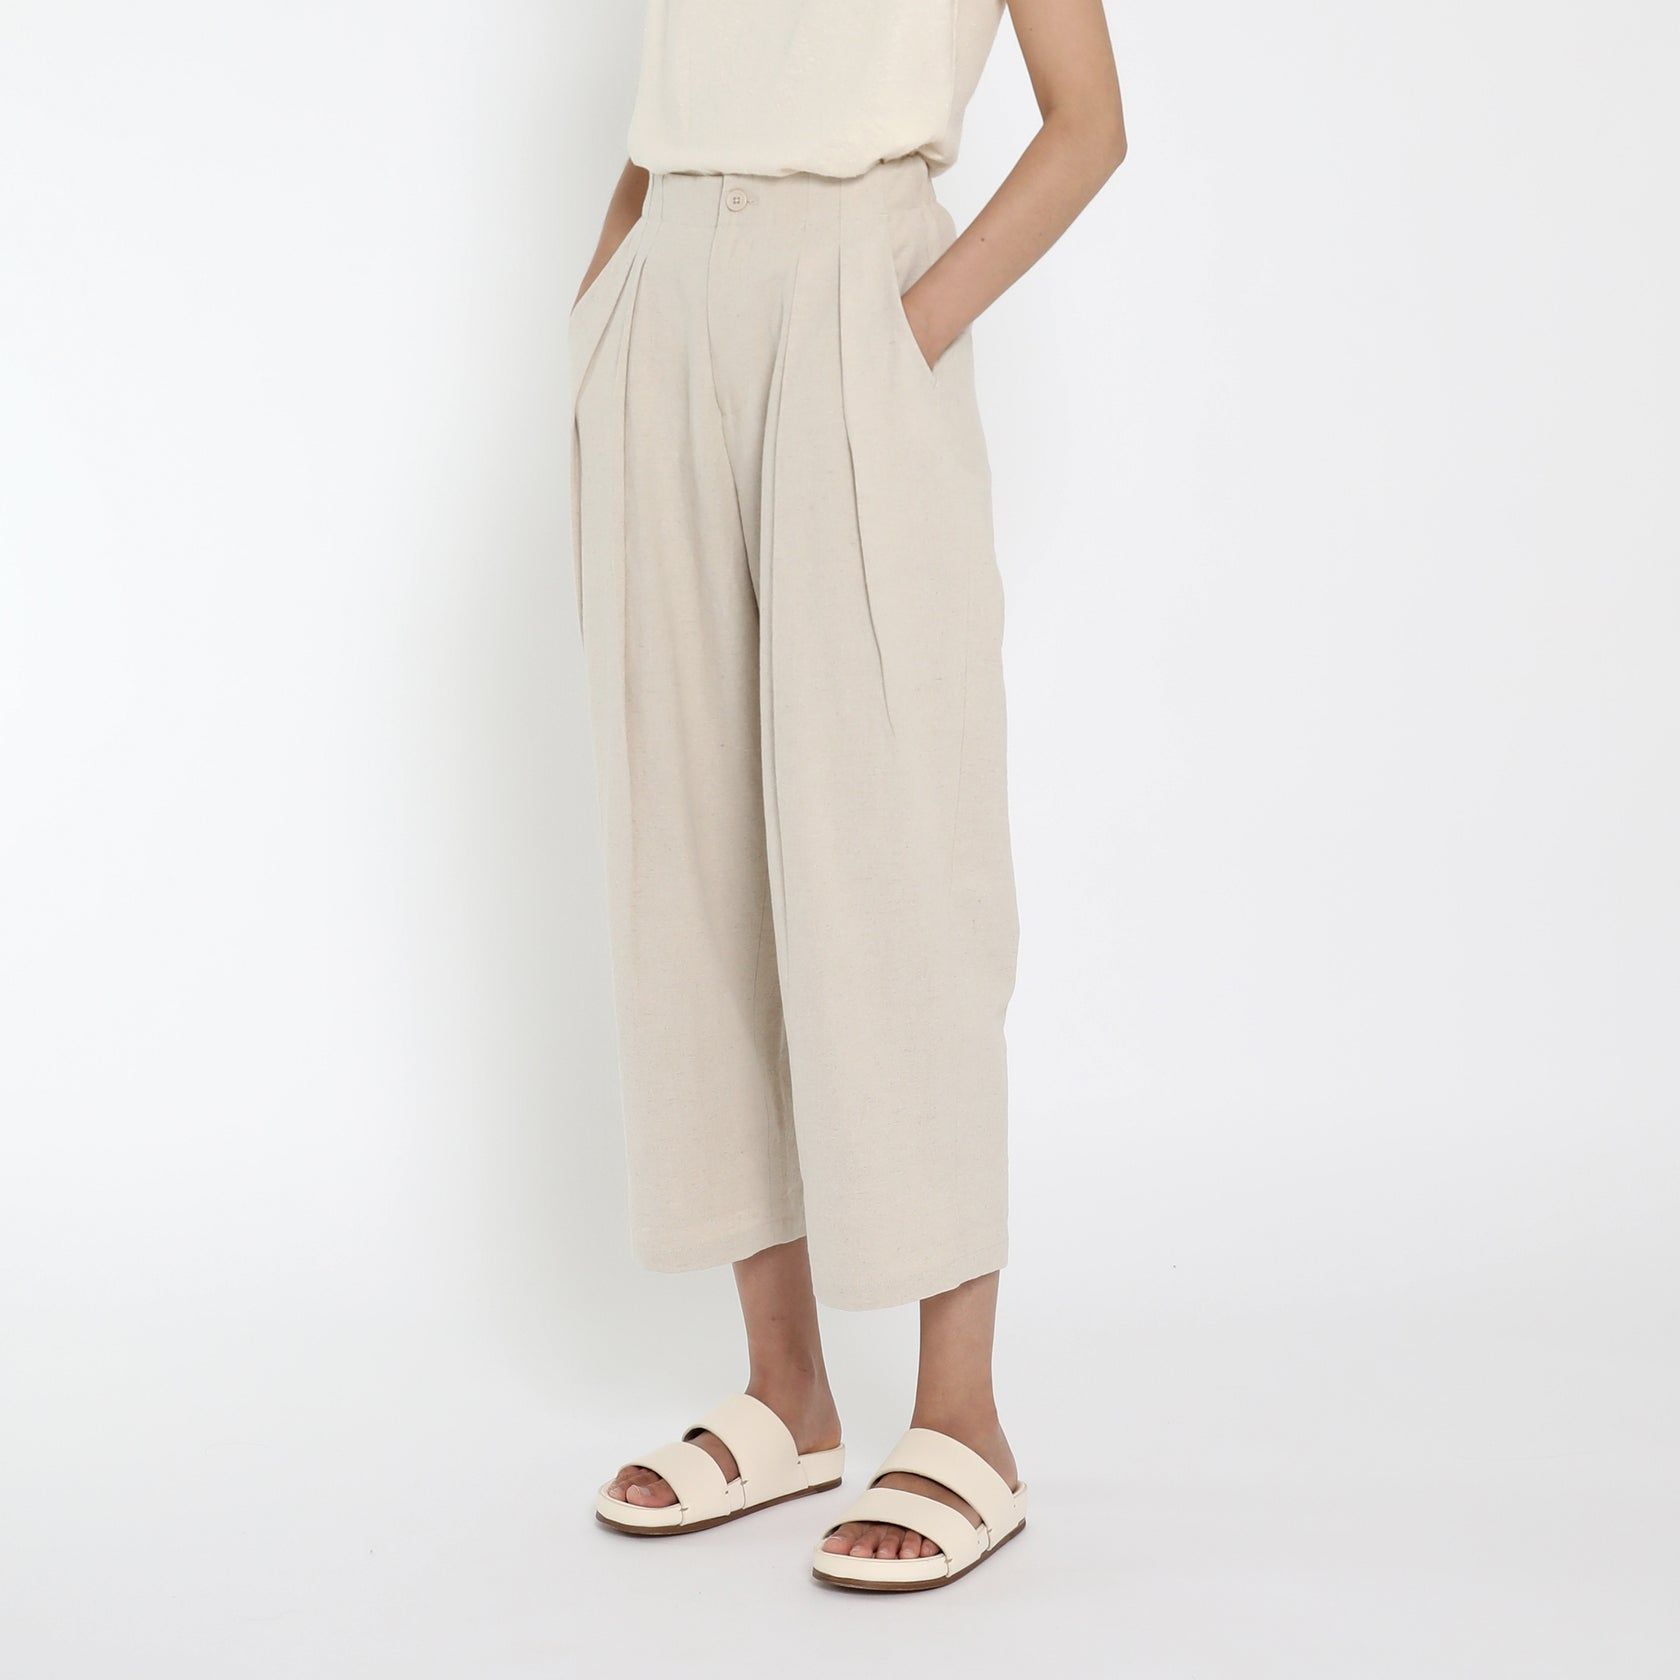 Product Image for Signature Unisex Pleated Trouser, Oatmeal